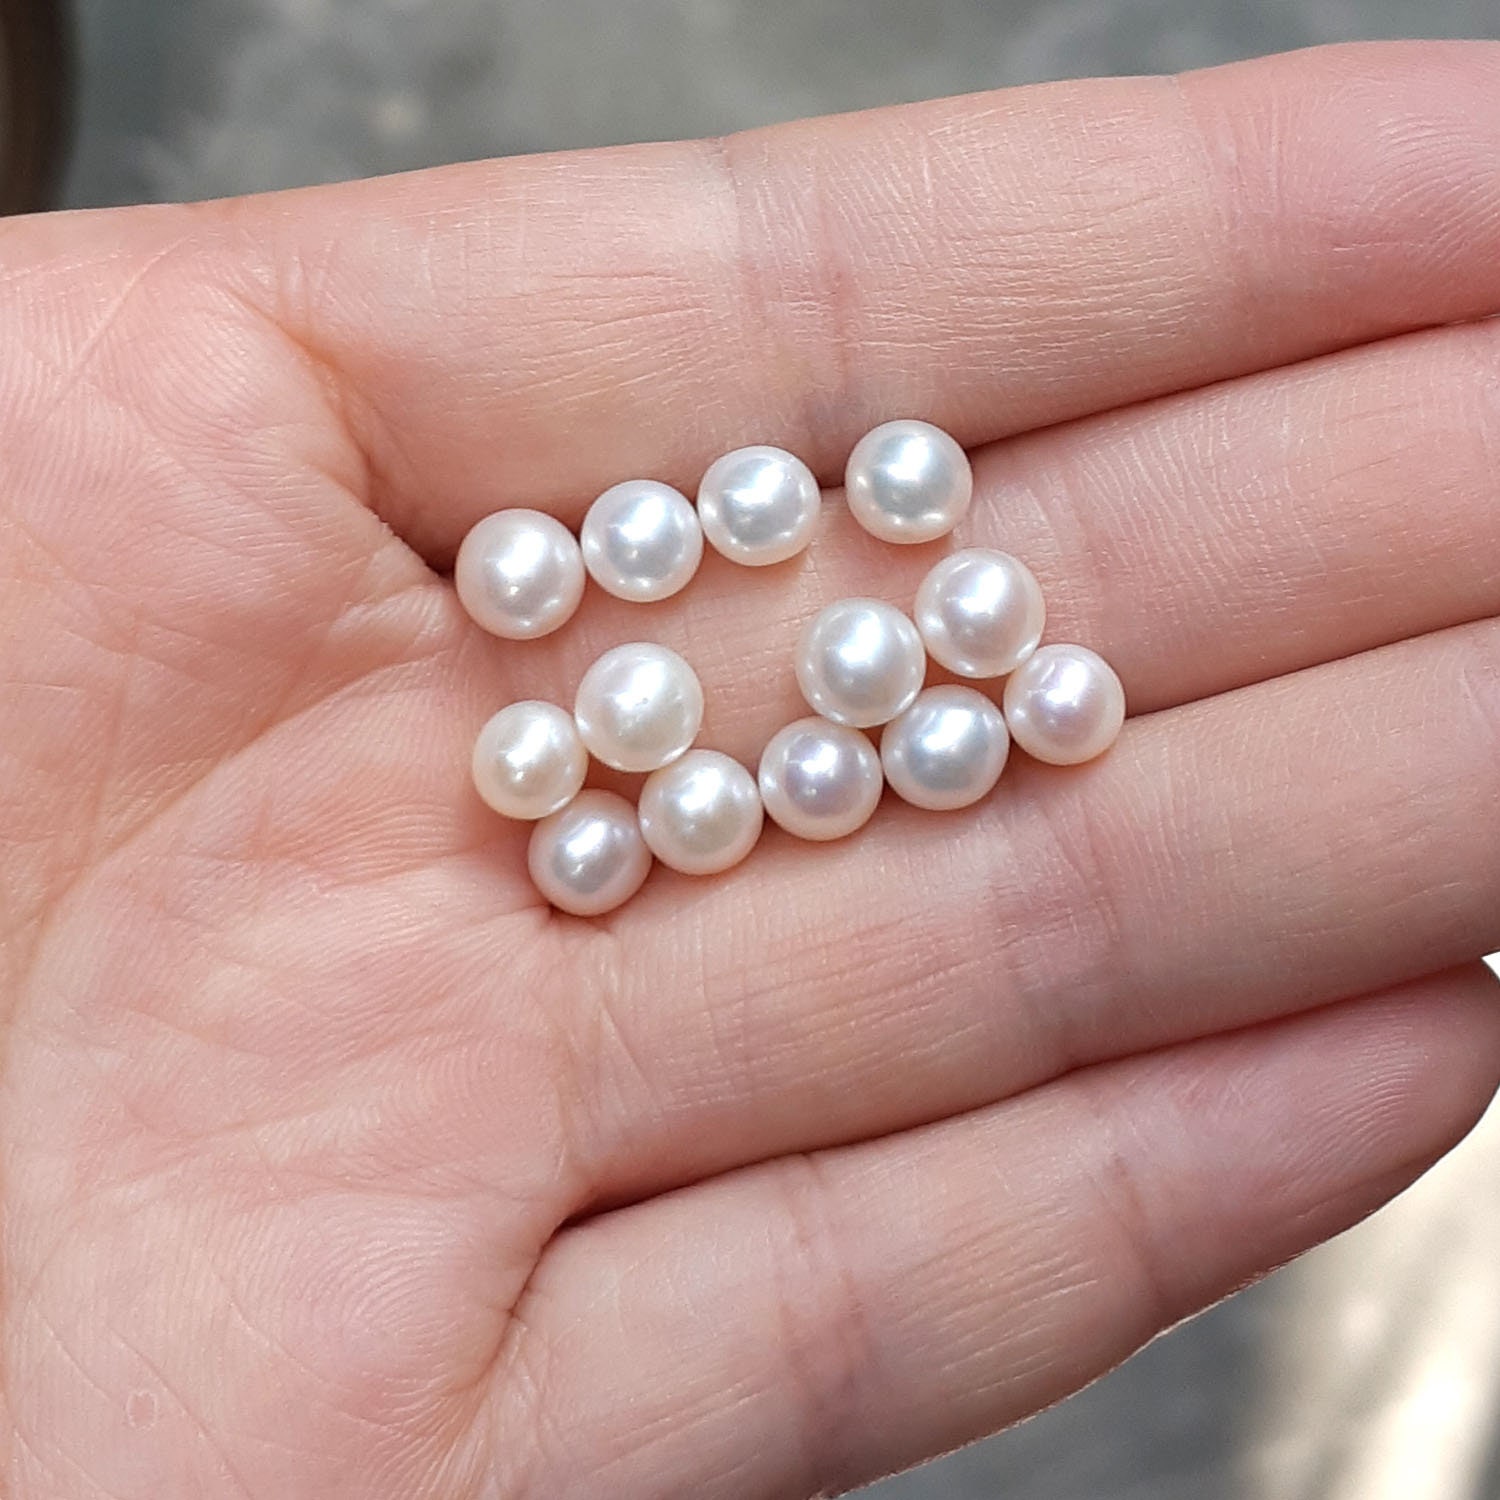 Niziky 300PCS 8mm Crafts No Hole Pearls, White Loose Pearls Beads